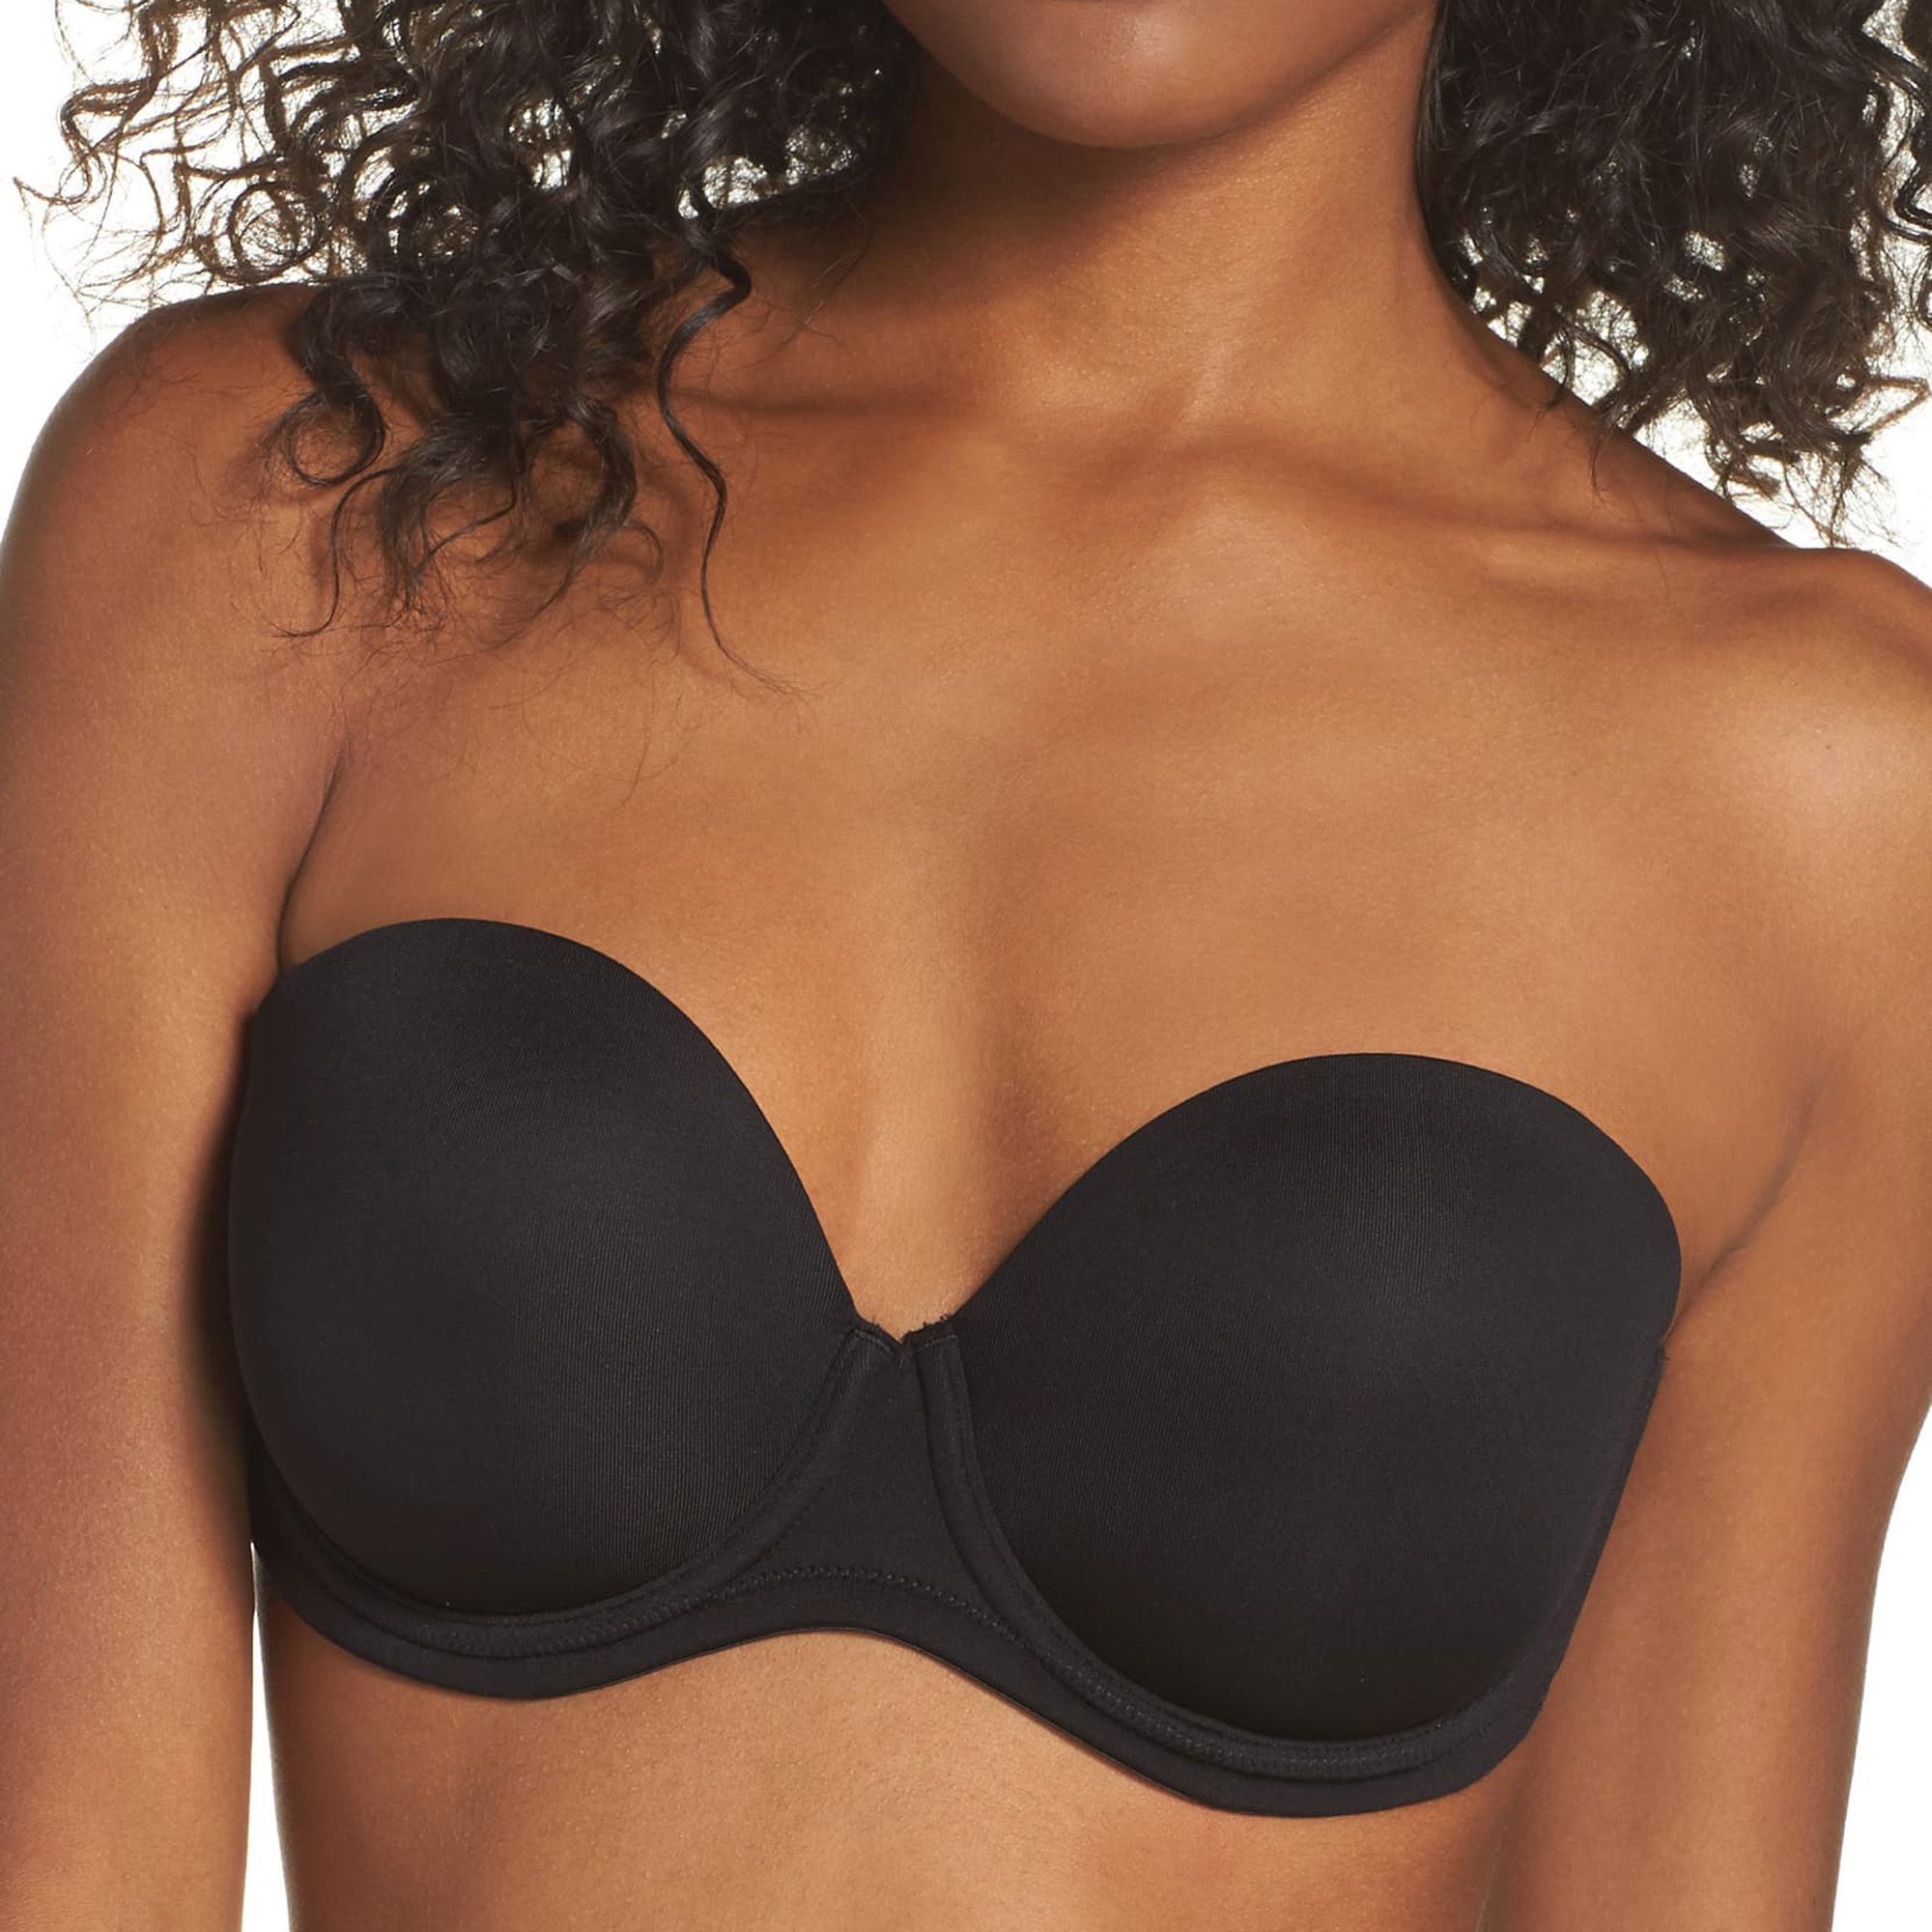 Flat Chested Tiny Teen - 11 Best Strapless Bras 2019 â€” Strapless Bra for Every Shape